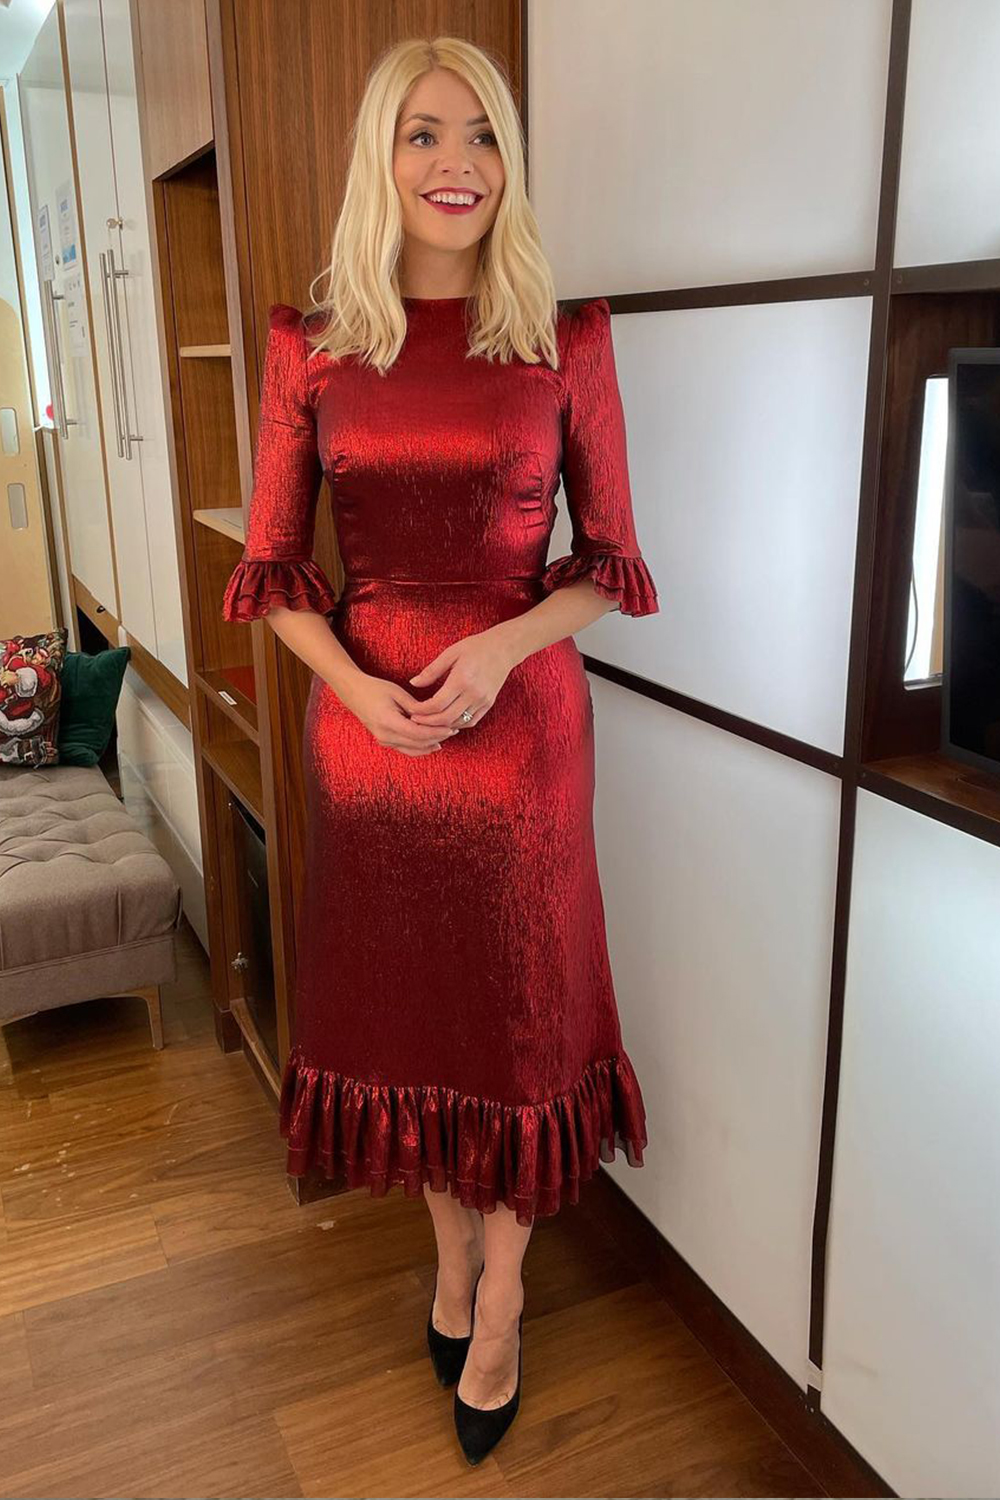 Holly Willoughby Just Wore the Same Dress as K-Mids, and It Looks So Good